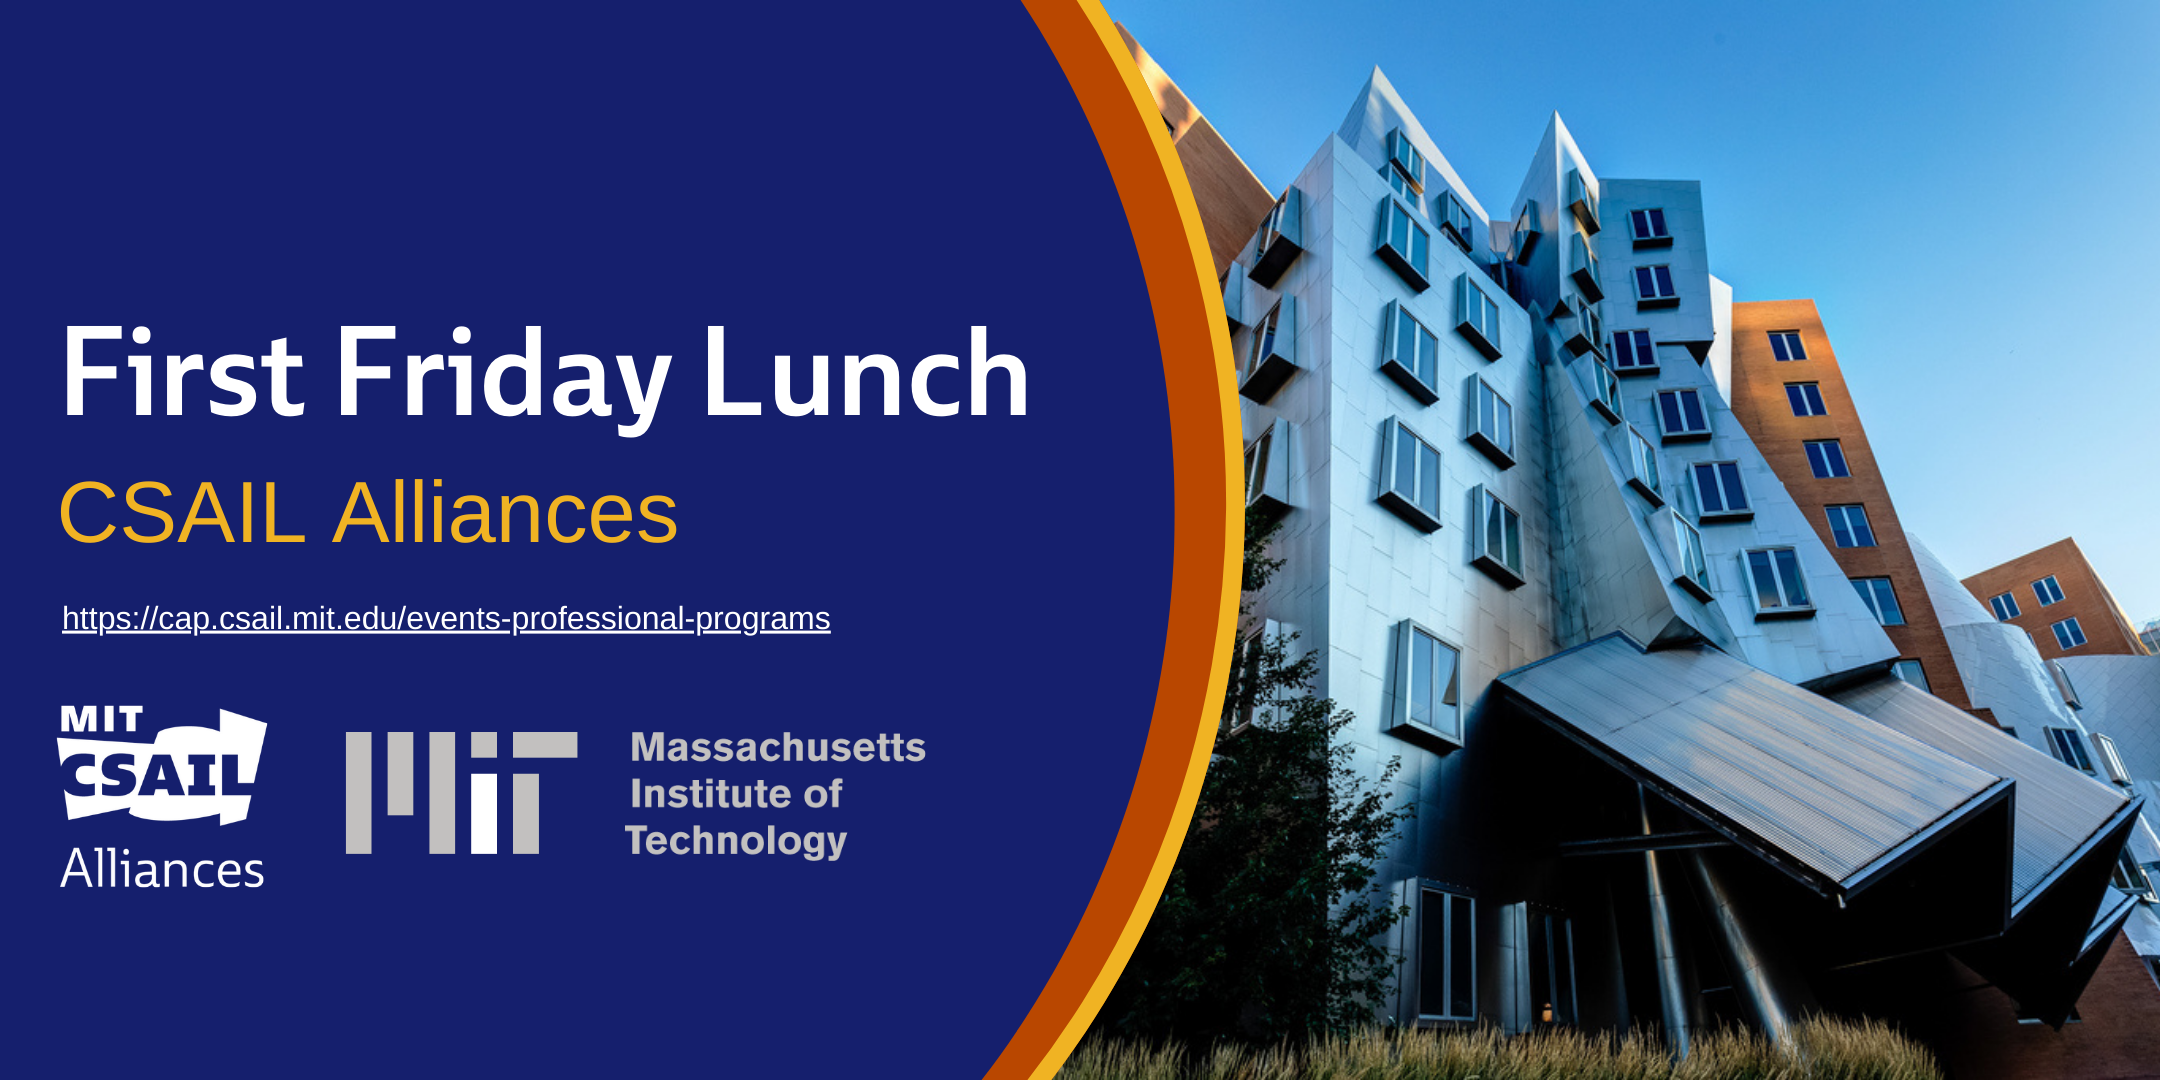 MIT Stata Center with text "First Friday Lunch" and MIT CSAIL logo and MIT logo